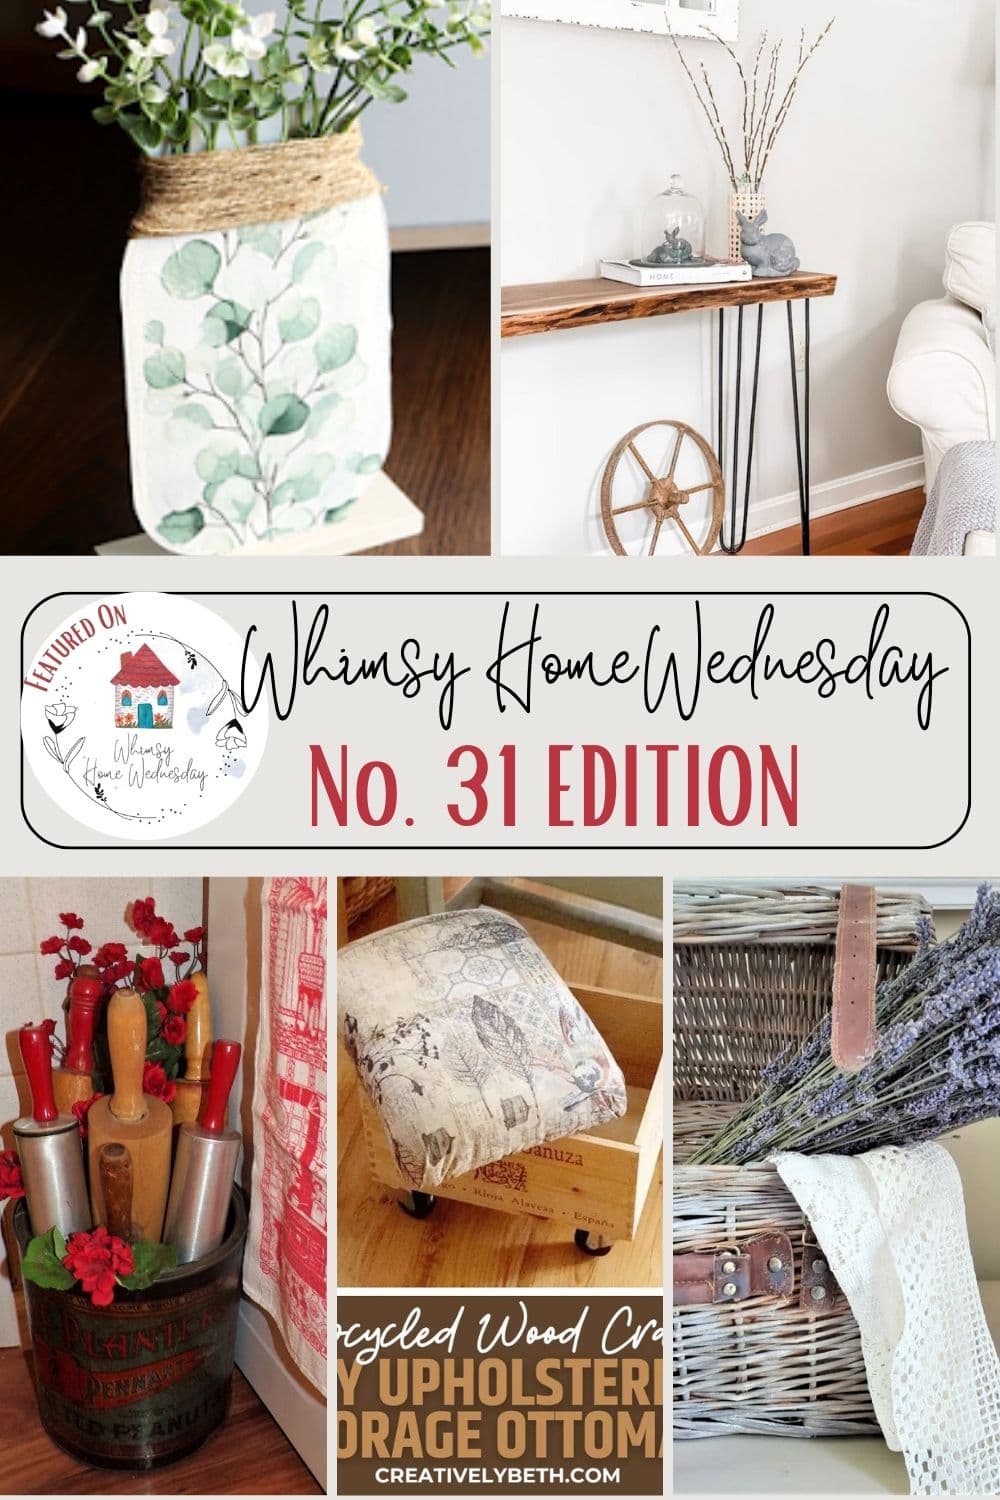 Join us on Whimsy Home Wednesday Blog Link Party No. 31 and see host projects, the features from the previous week and link up your posts!